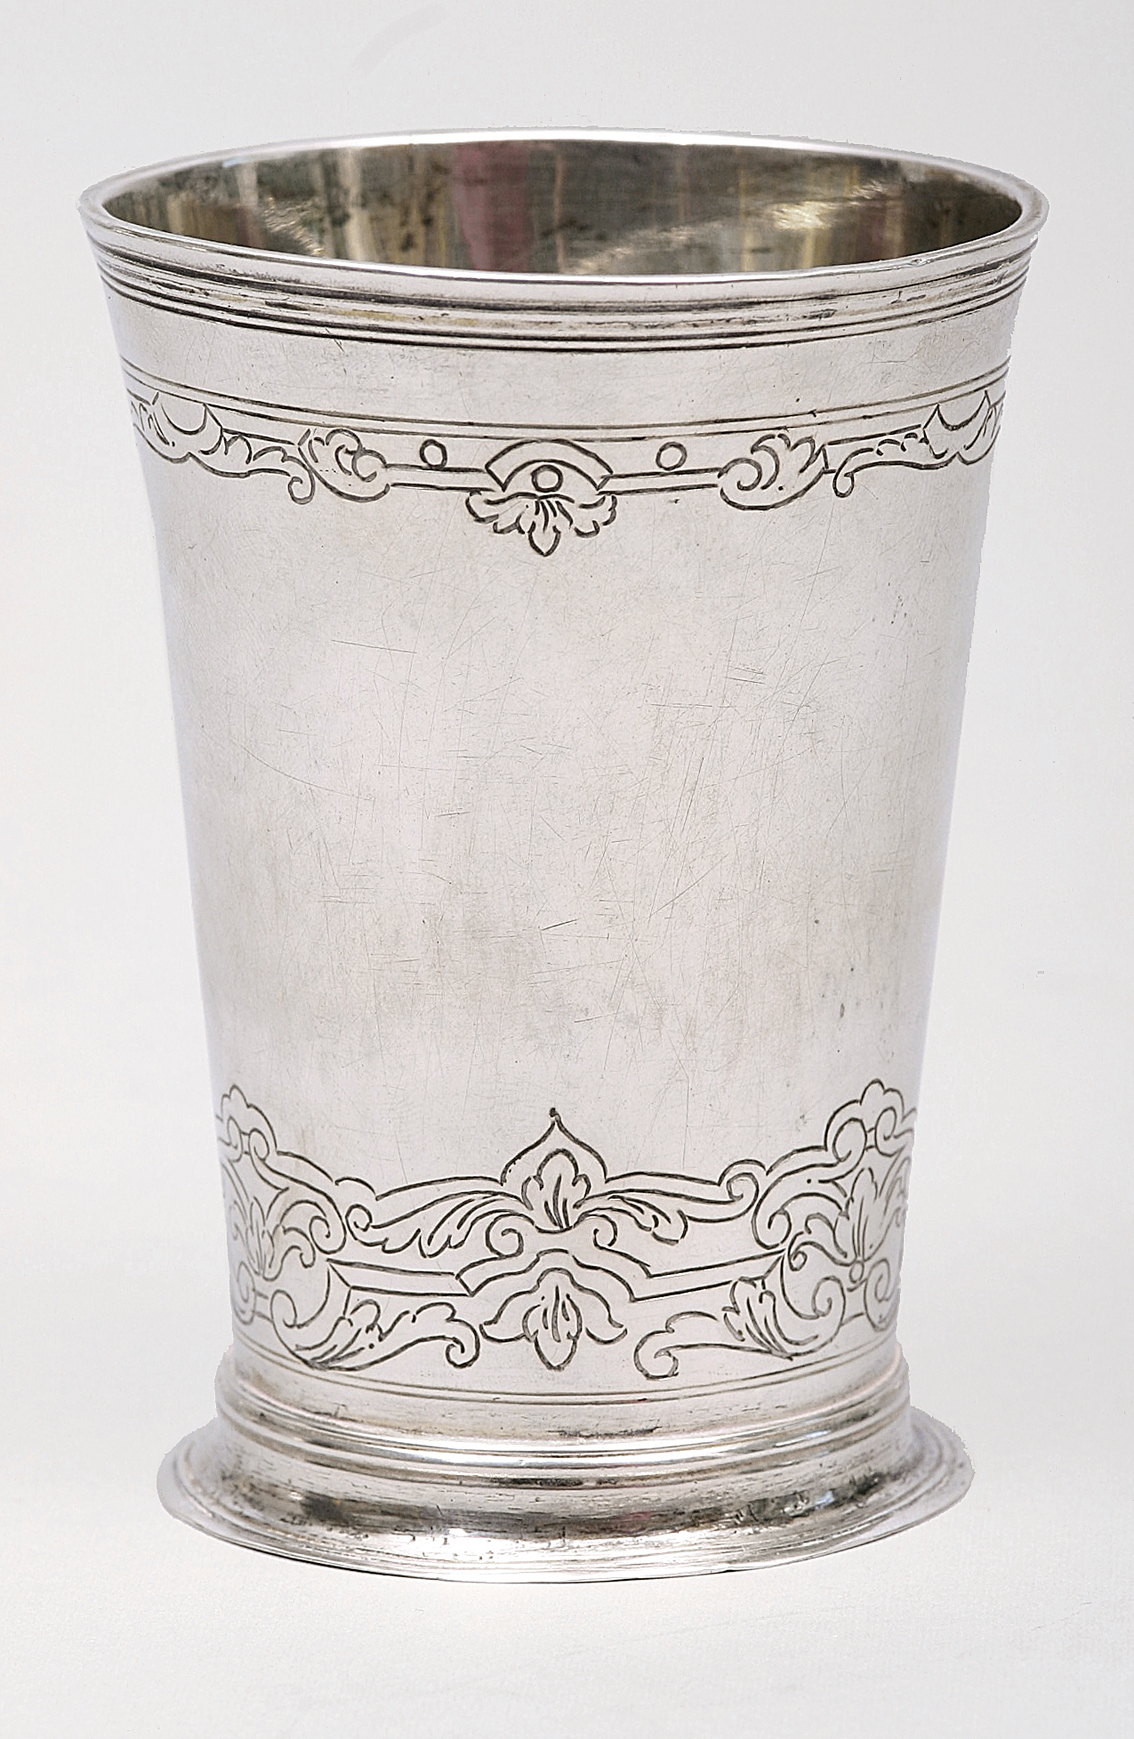 A small 'baroque' cup with fine engravings